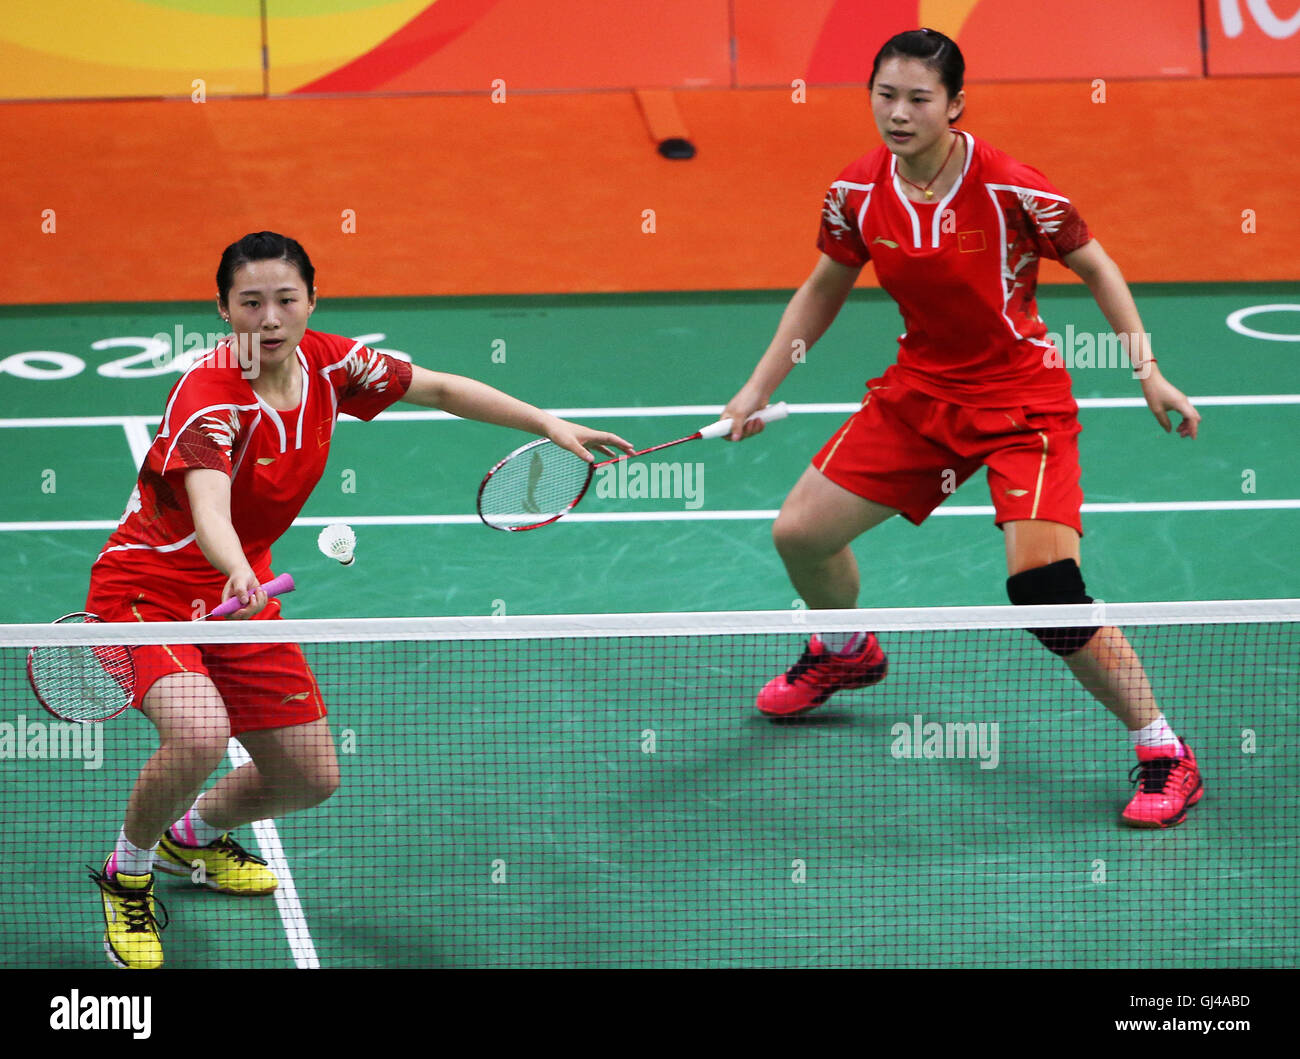 Rio De Janeiro, Brazil. 12th Aug, 2016. China's Luo Ying and Luo Yu compete against South Korea's Jung Kyung Eun and Shin Seung Chan during women's doubles group play stage match of Badminton at the 2016 Rio Olympic Games in Rio de Janeiro, Brazil, on Aug. 12, 2016. Jung Kyung Eun and Shin Seung Chan won the match 2-0. Credit:  Qin Lang/Xinhua/Alamy Live News Stock Photo